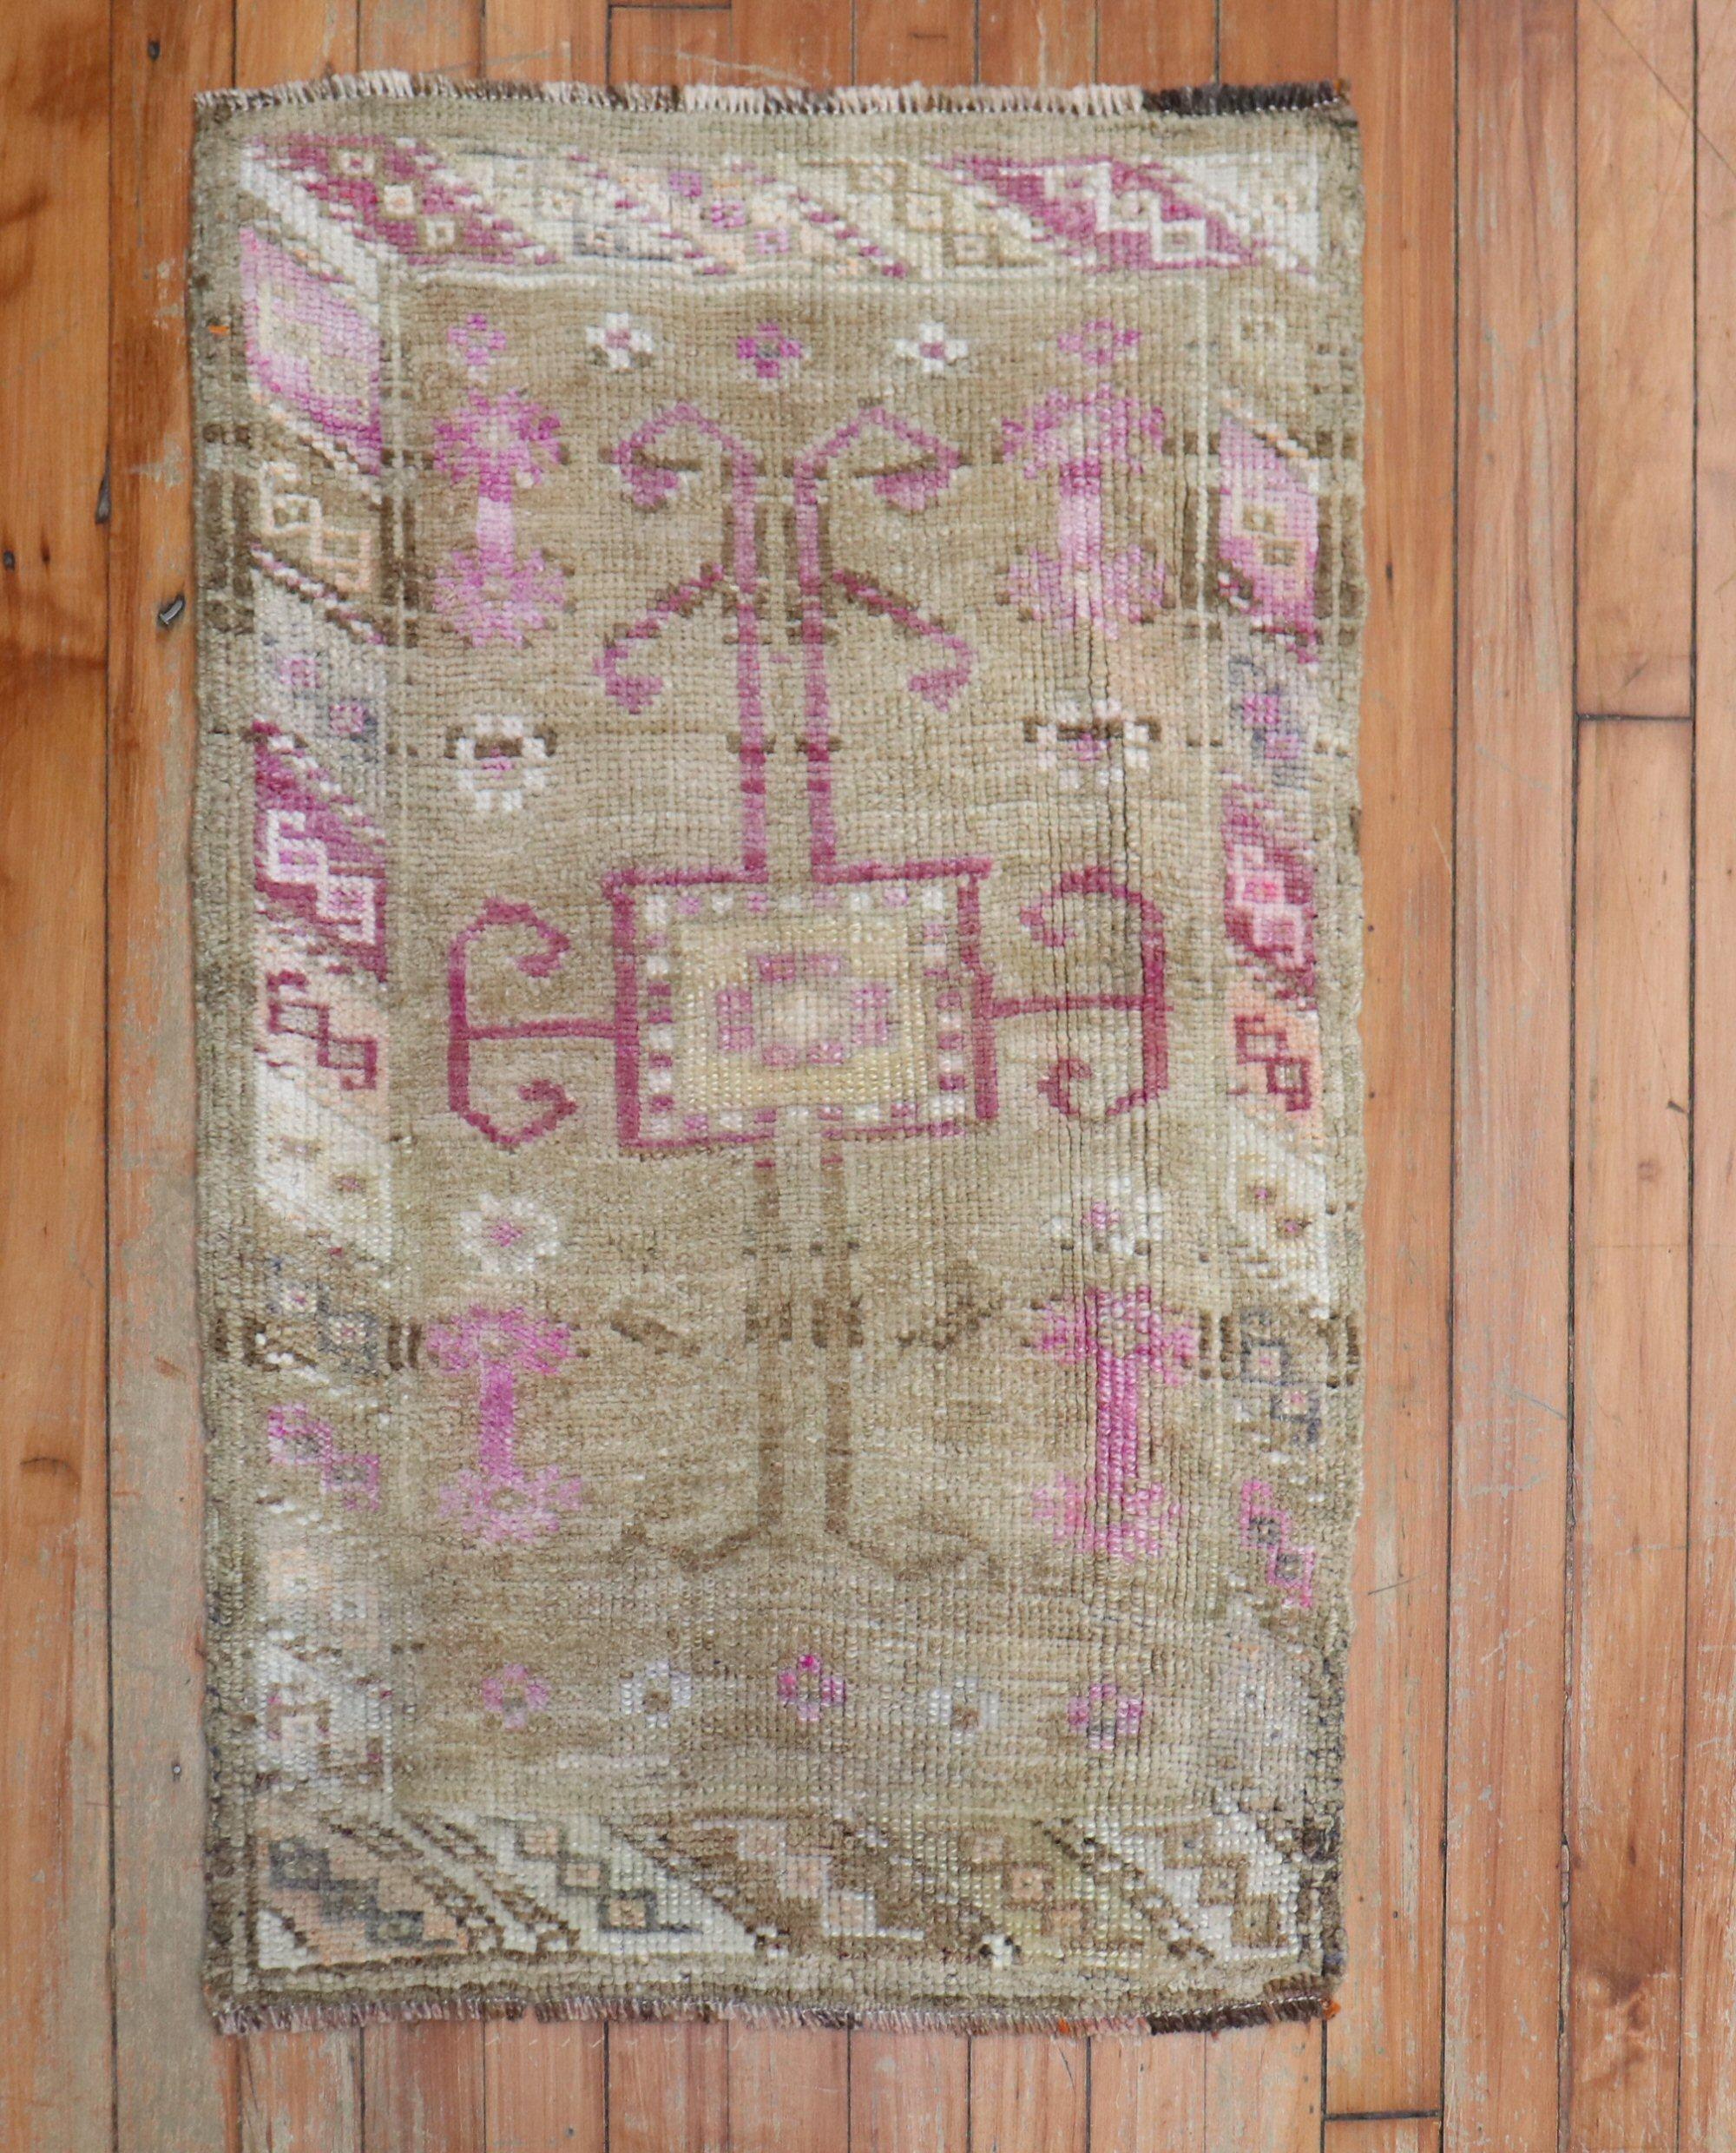 miniature size mid 20th century turkish rug with pops of pink on a predominant brown field

Measures: 1'9' x 2'9